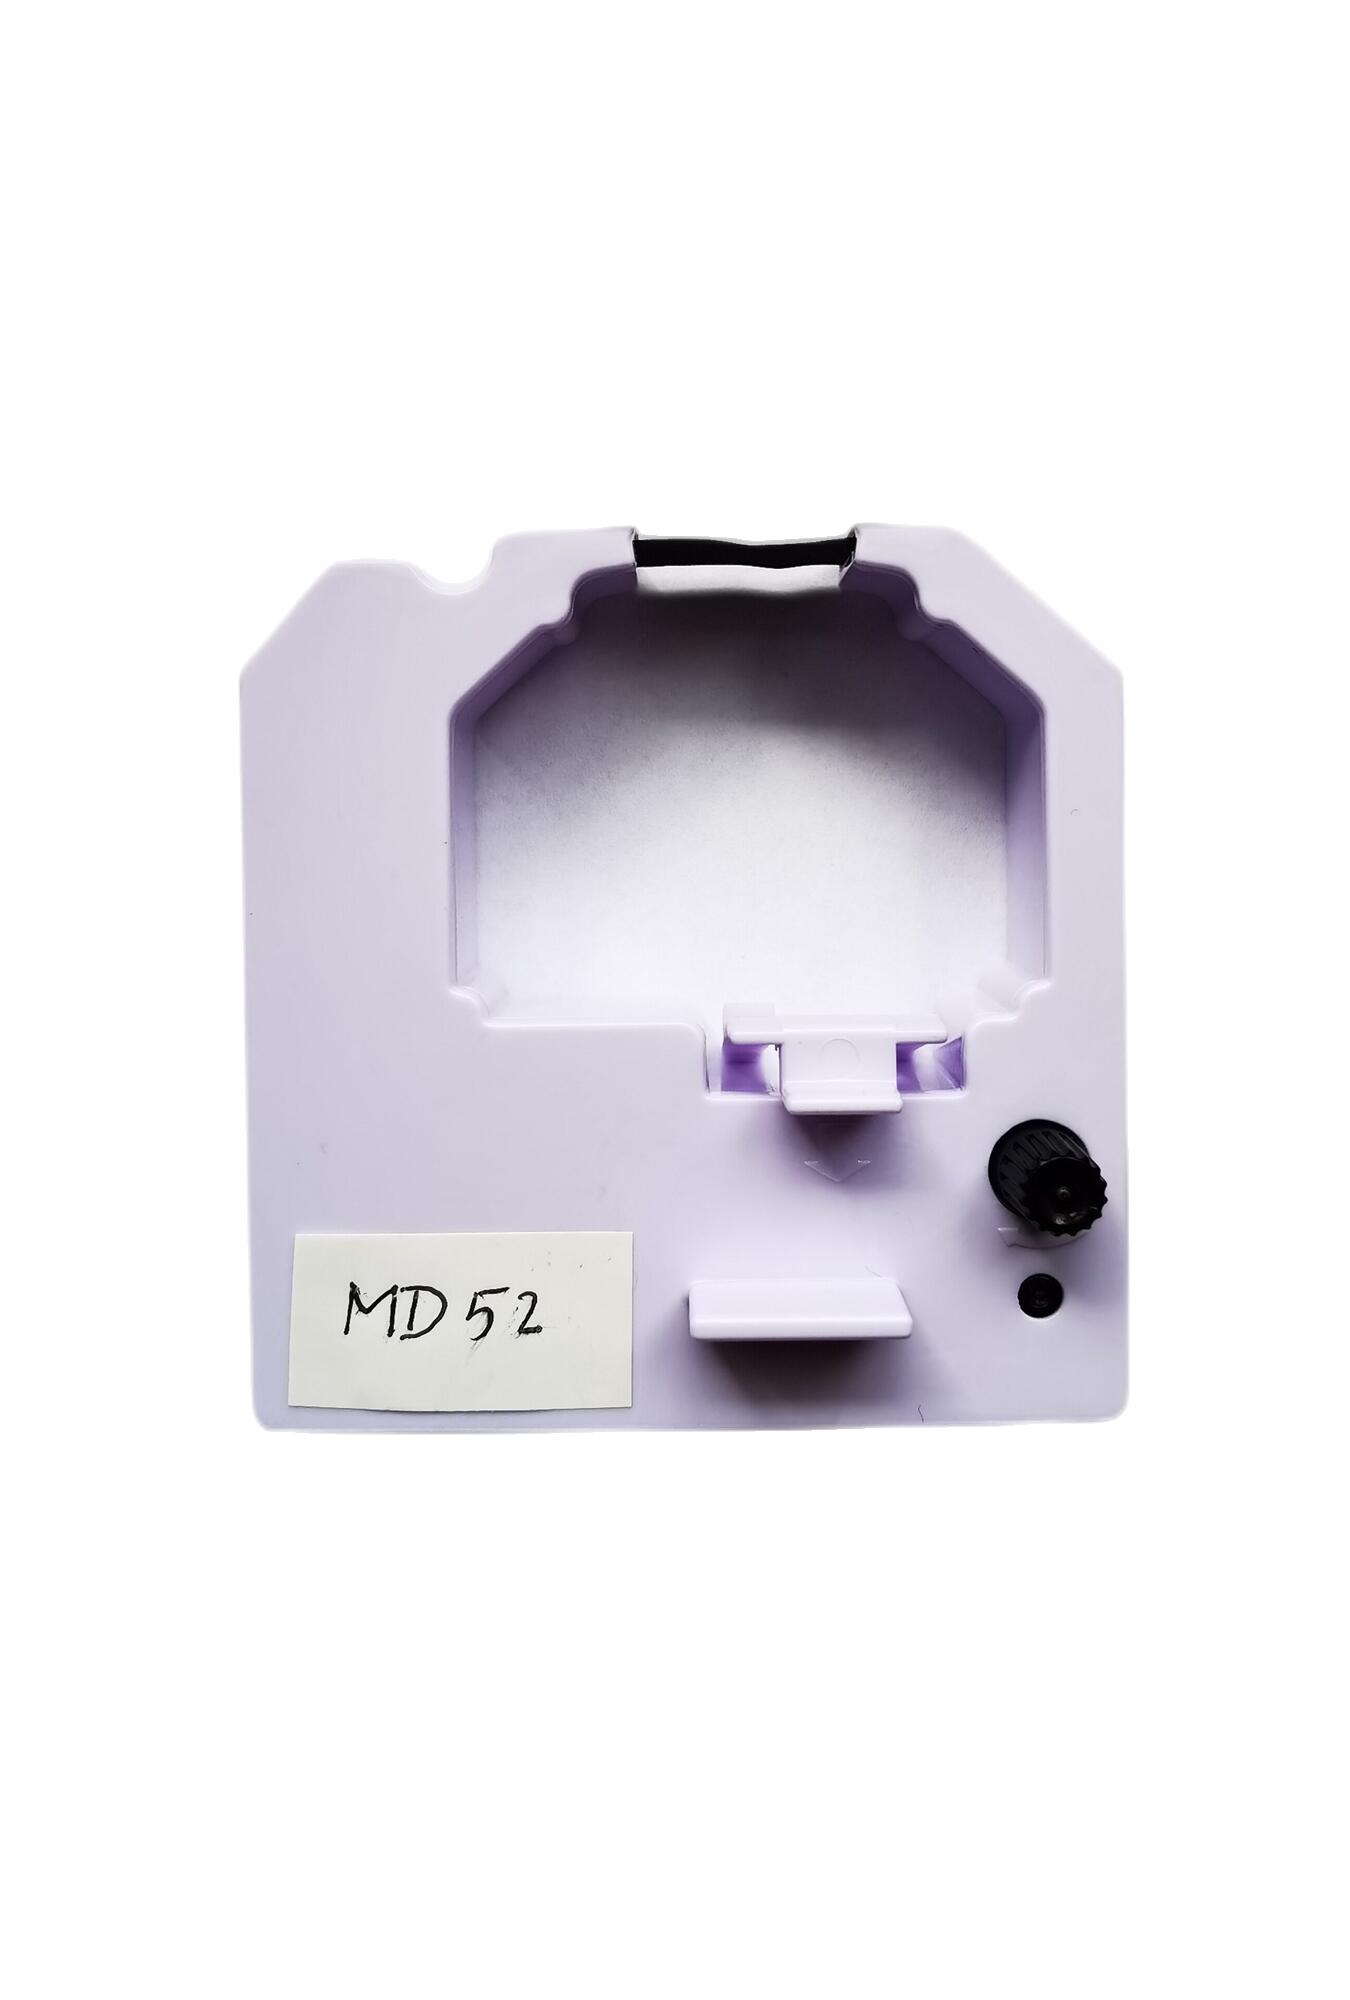 MD52 Nylon BlackInk Ribbon , ink cartridge for printing, for MD...